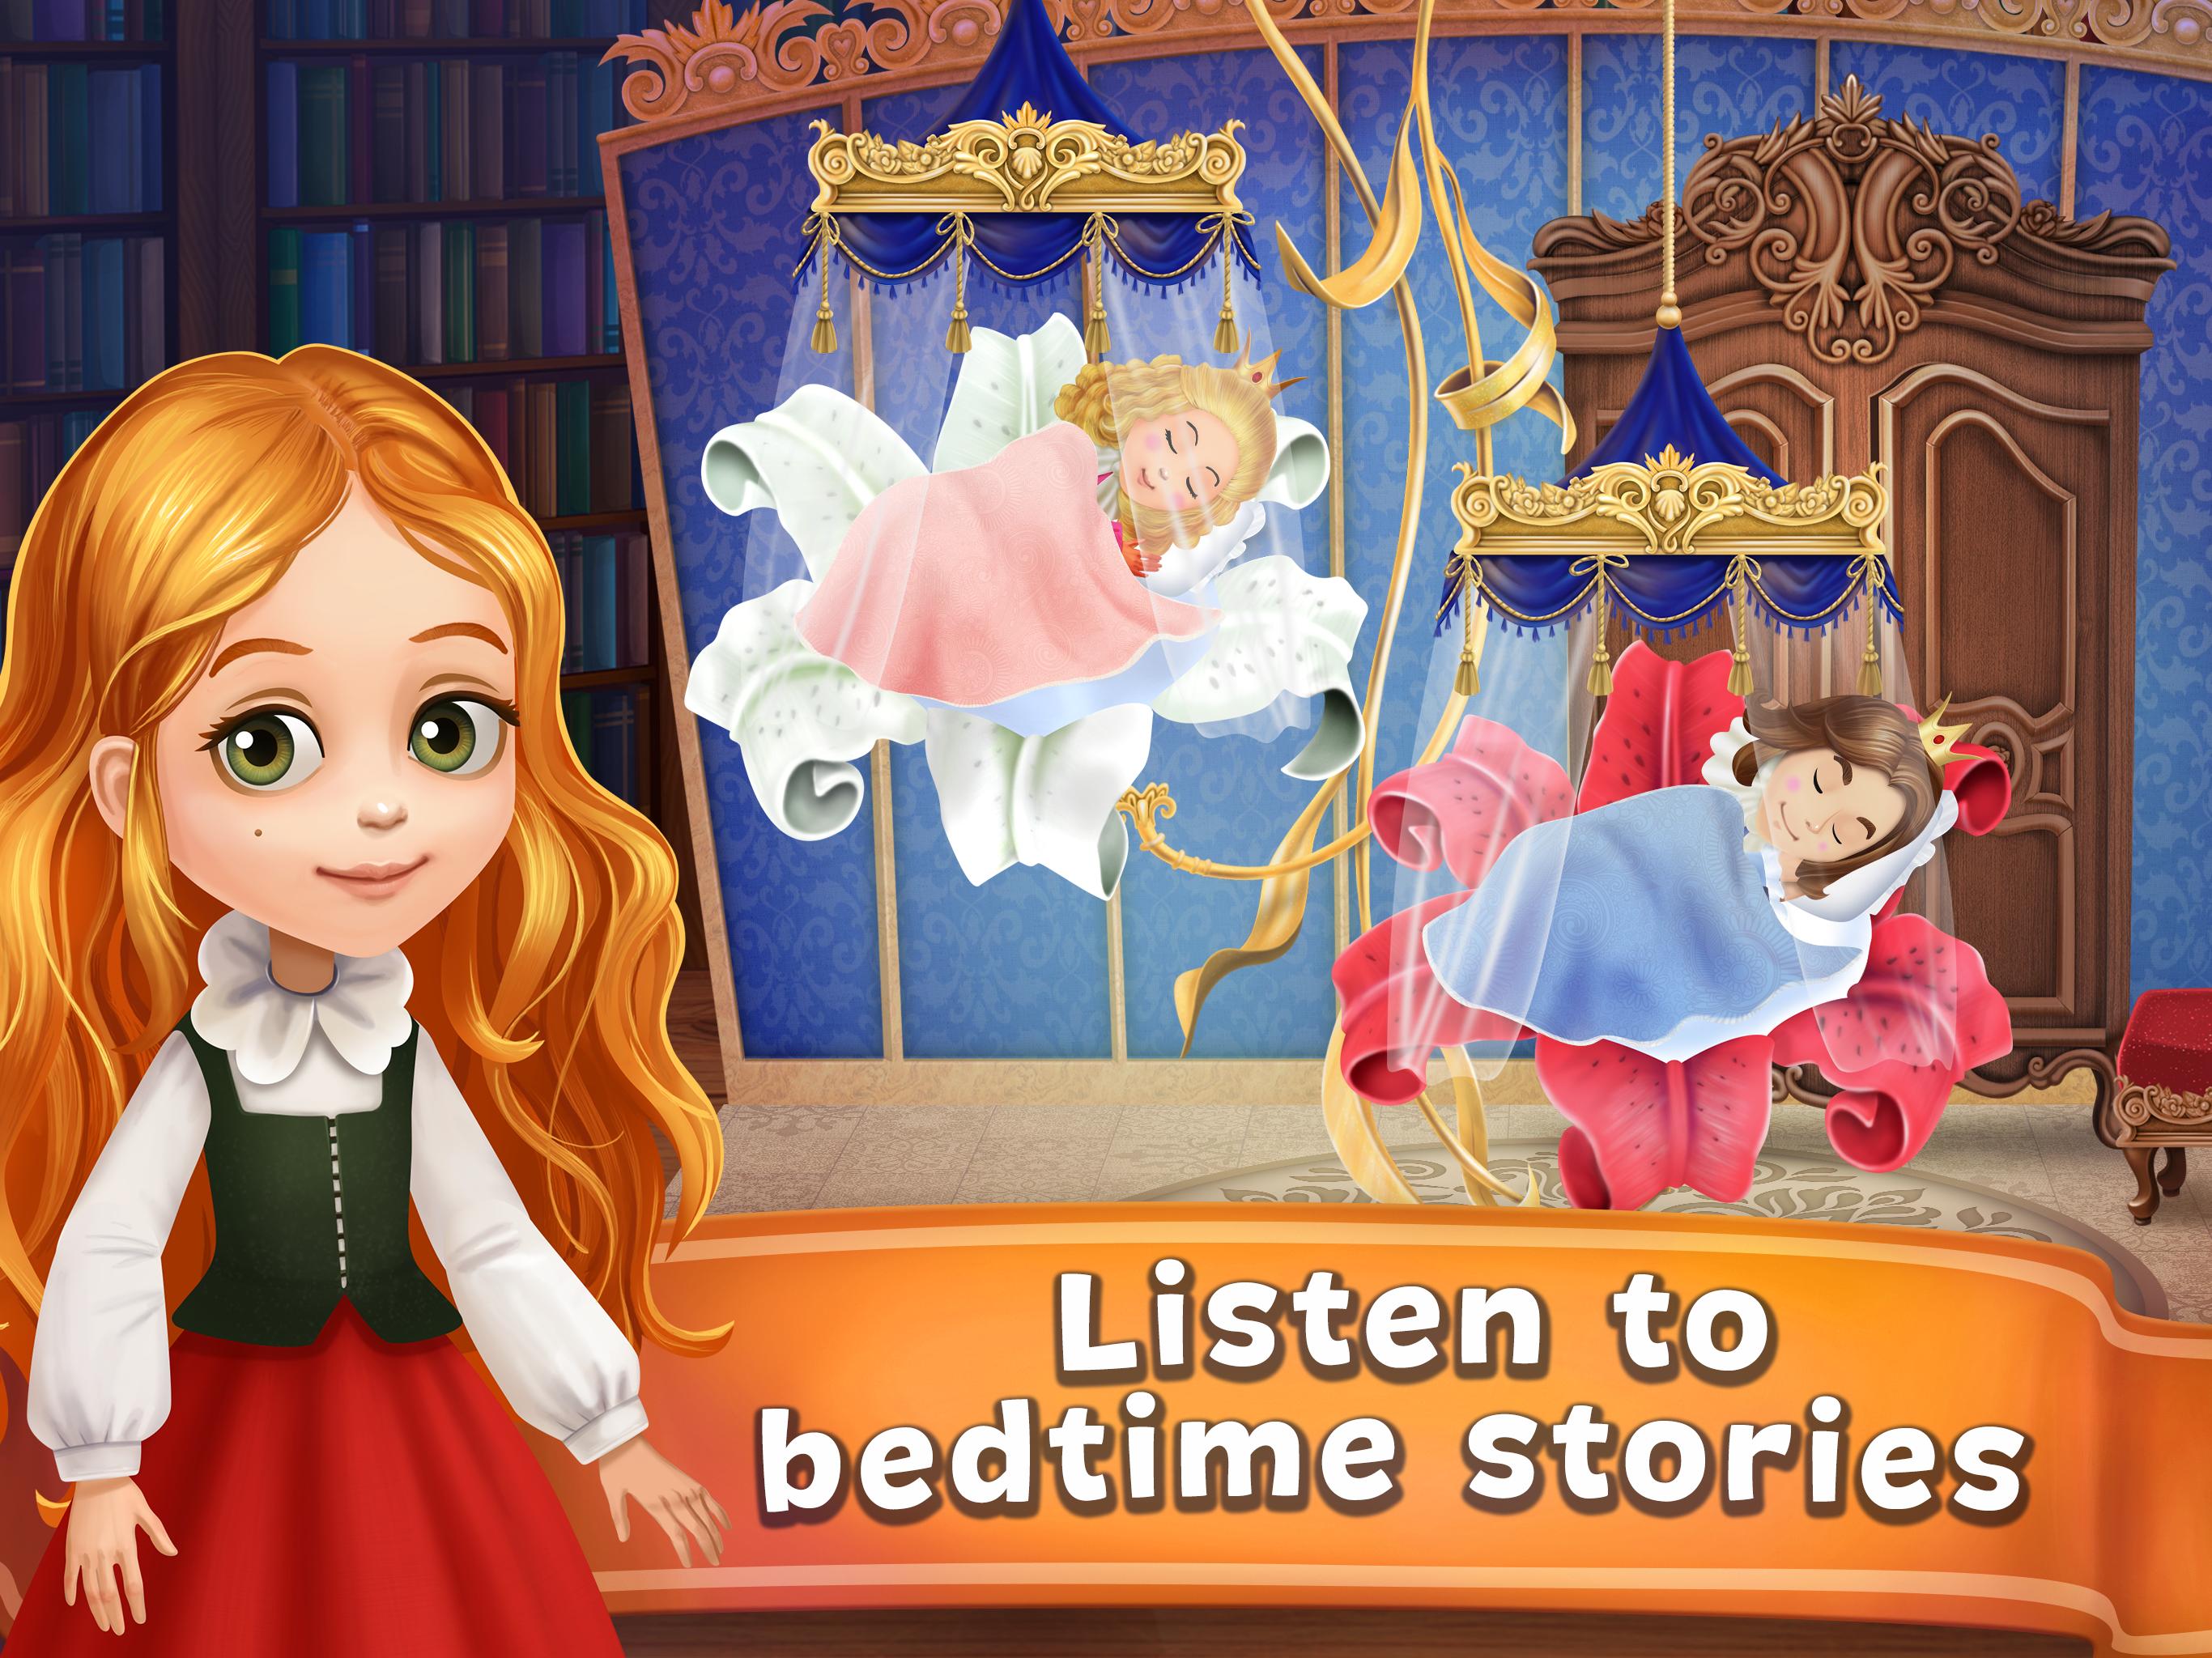 Fairy Tales Children’s Books, Stories and Games 2.7.0 Screenshot 9